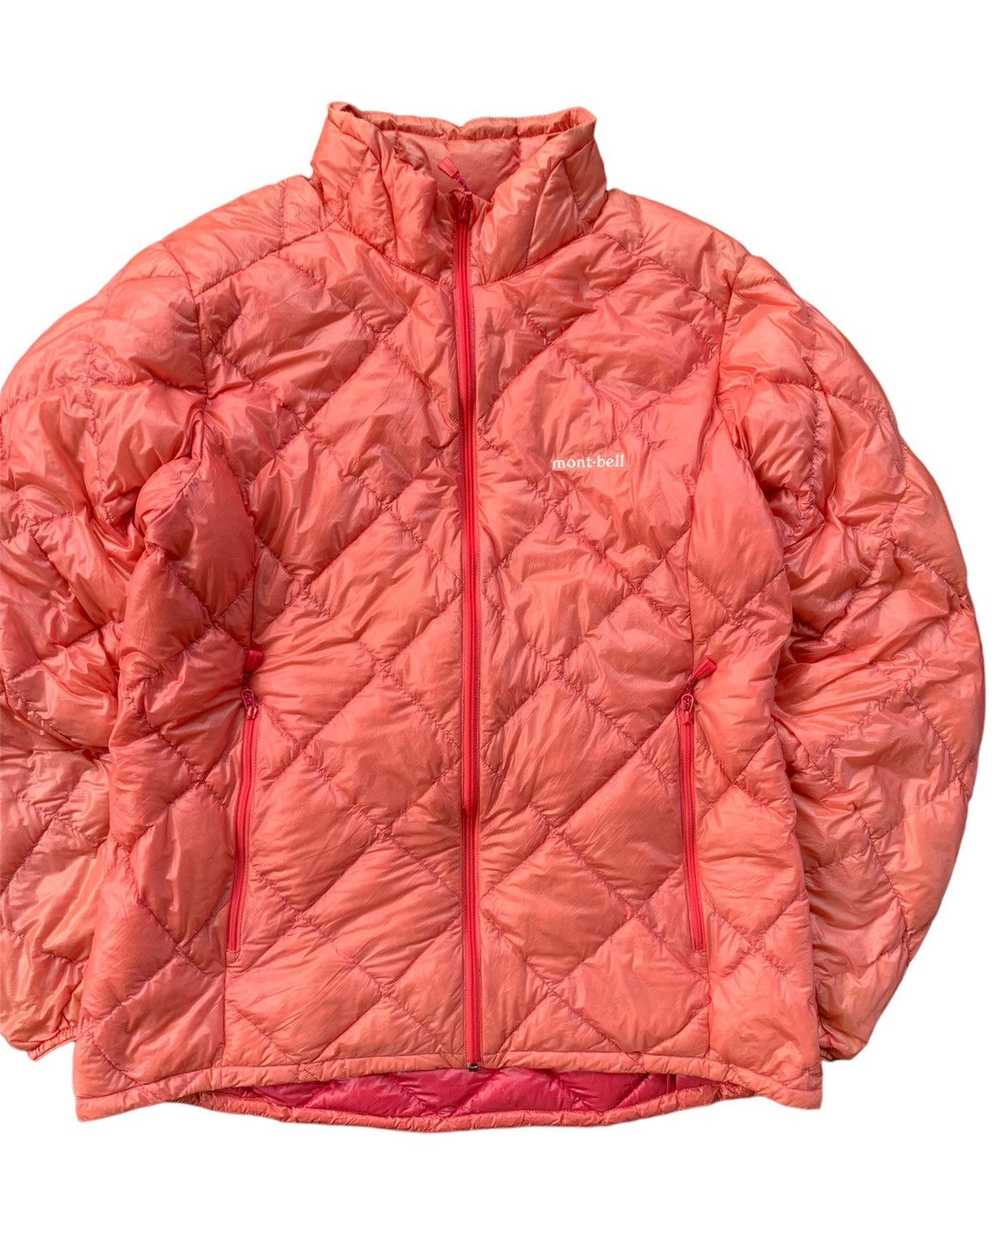 Montbell 2000s Diamond Lightweight Down Jacket - image 2